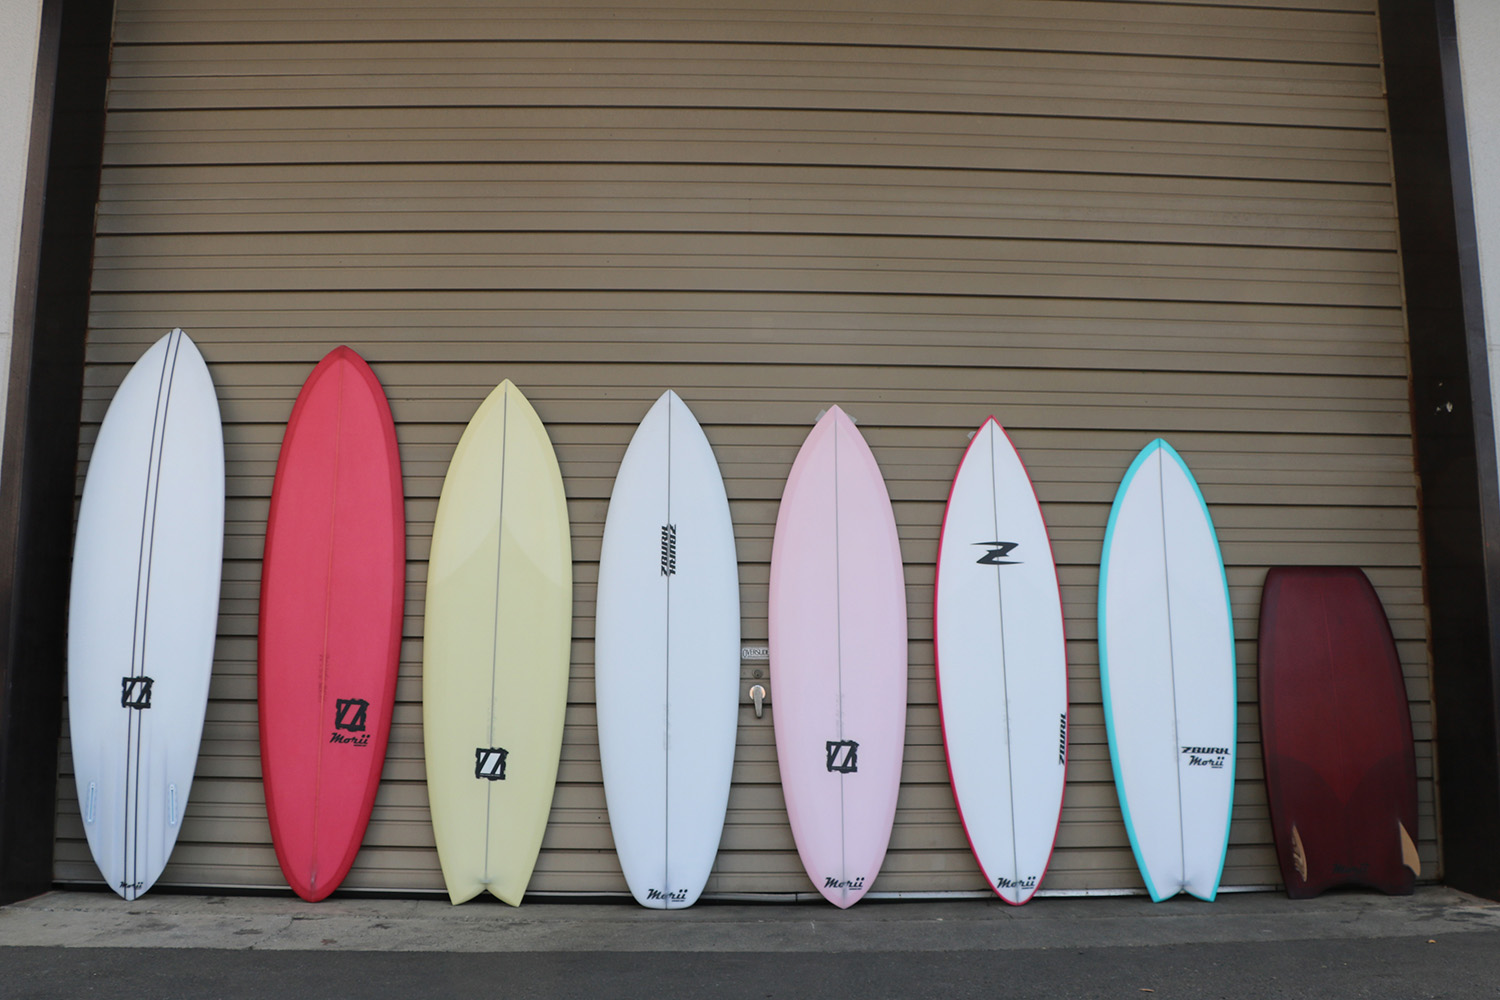 ZBURH CUSTOM SURFBOARDS – What Board Should Your Ride?